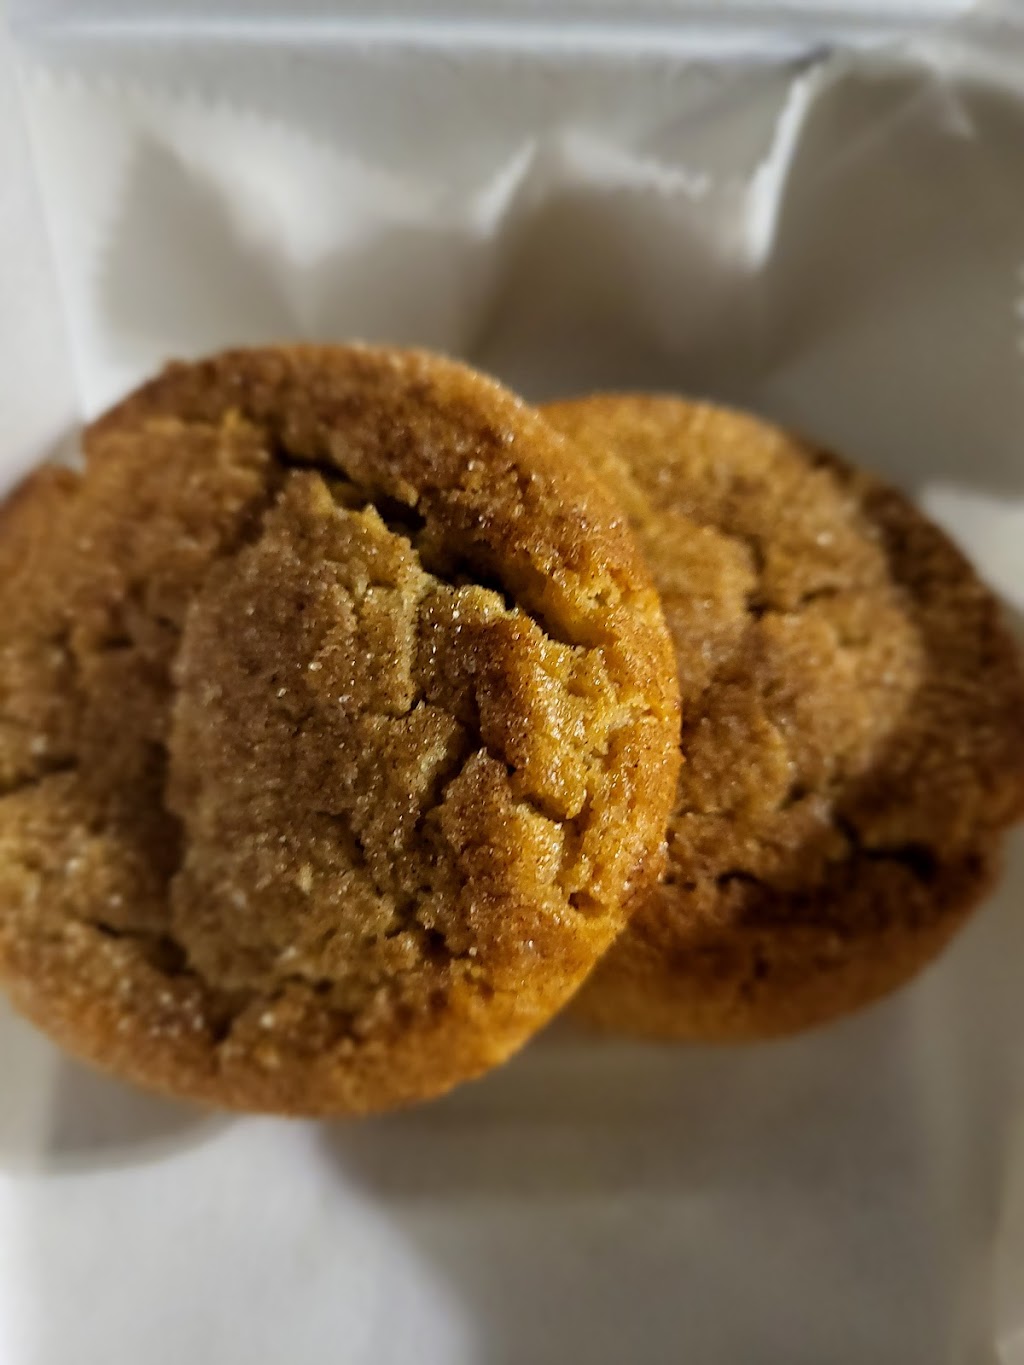 Nocturnal Cookies | 5 Clinton Square, Albany, NY 12207, USA | Phone: (518) 380-6790